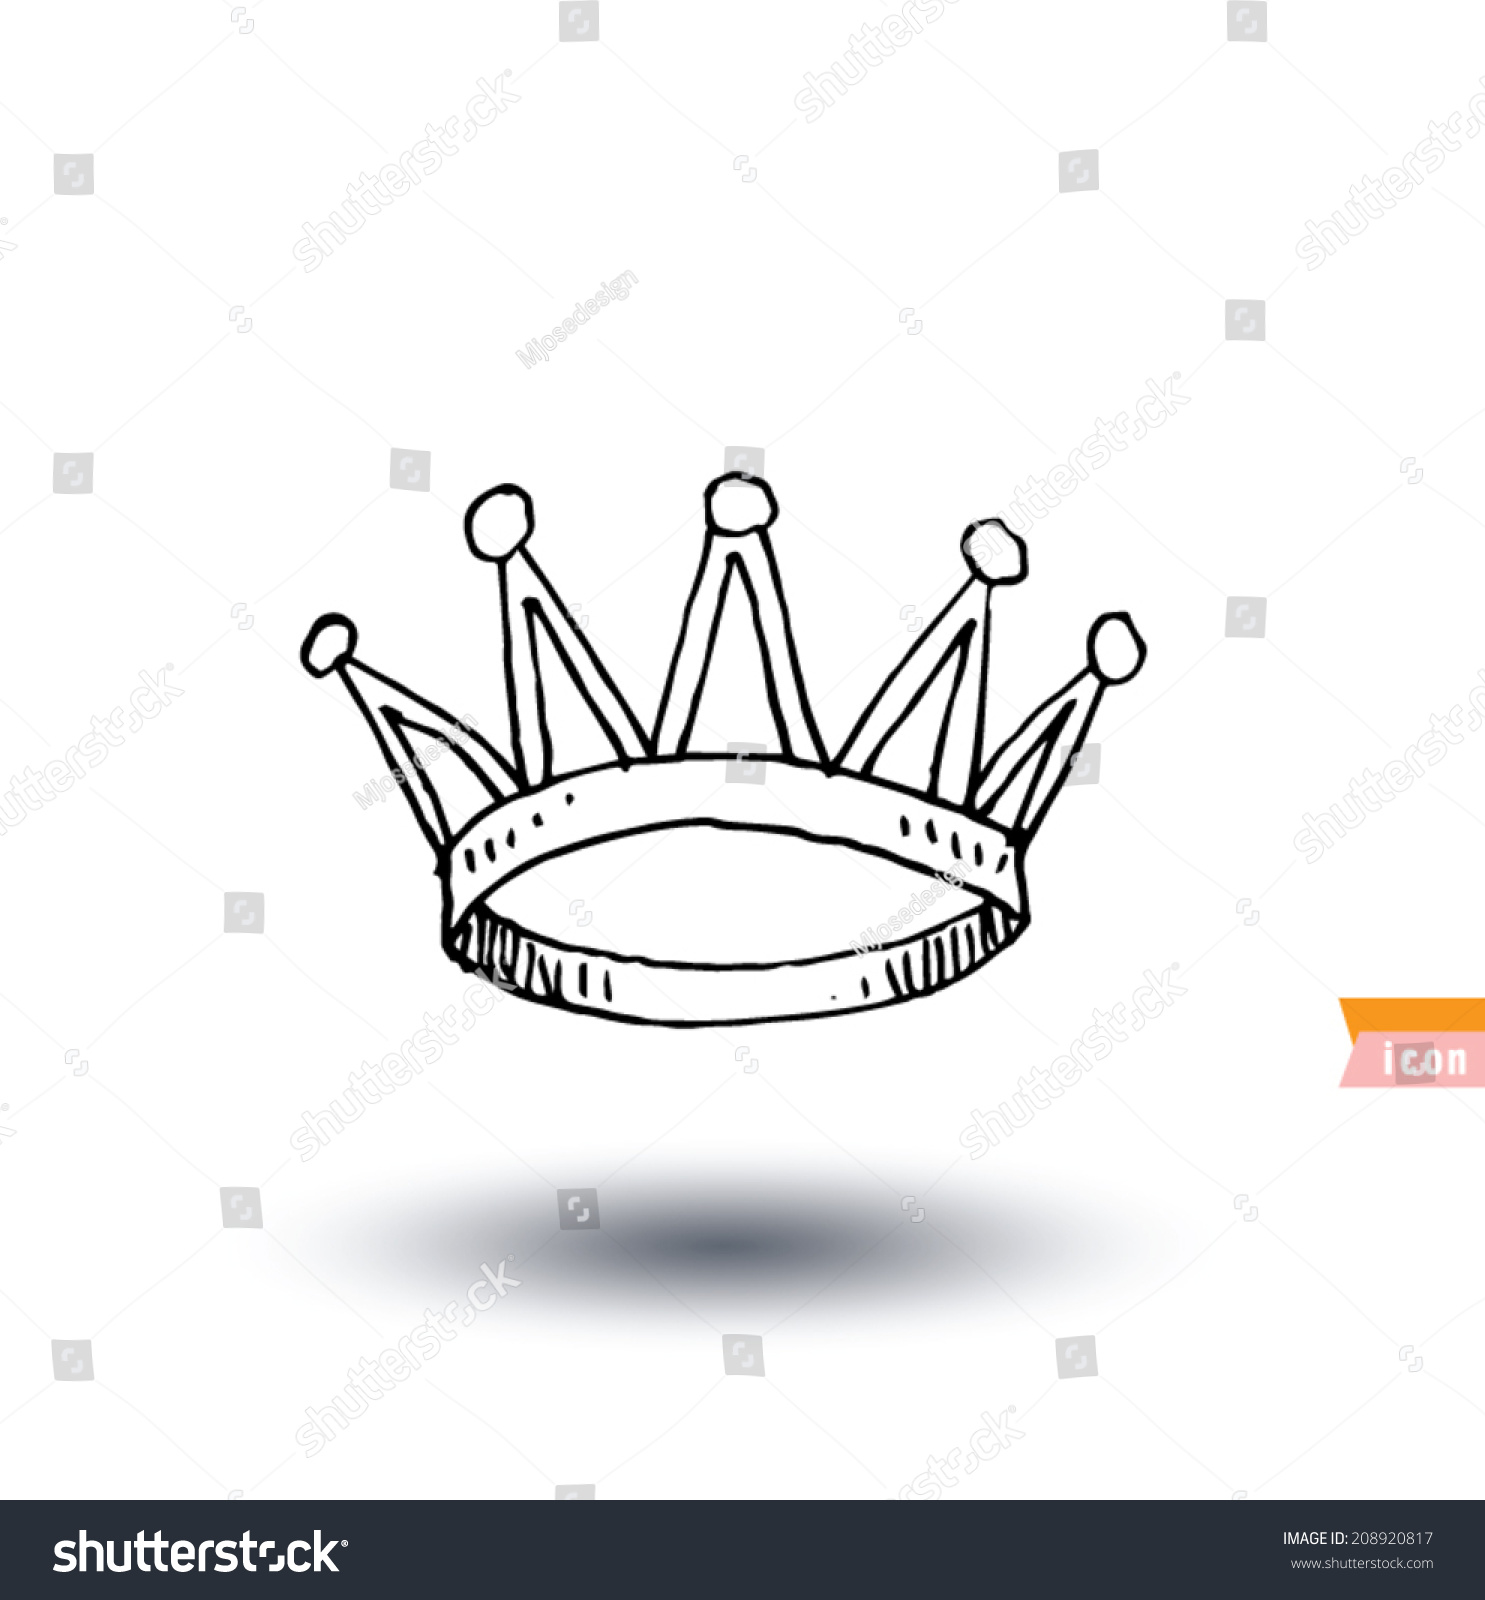 Crown Hand Drawn Vector Stock Vector (Royalty Free) 208920817